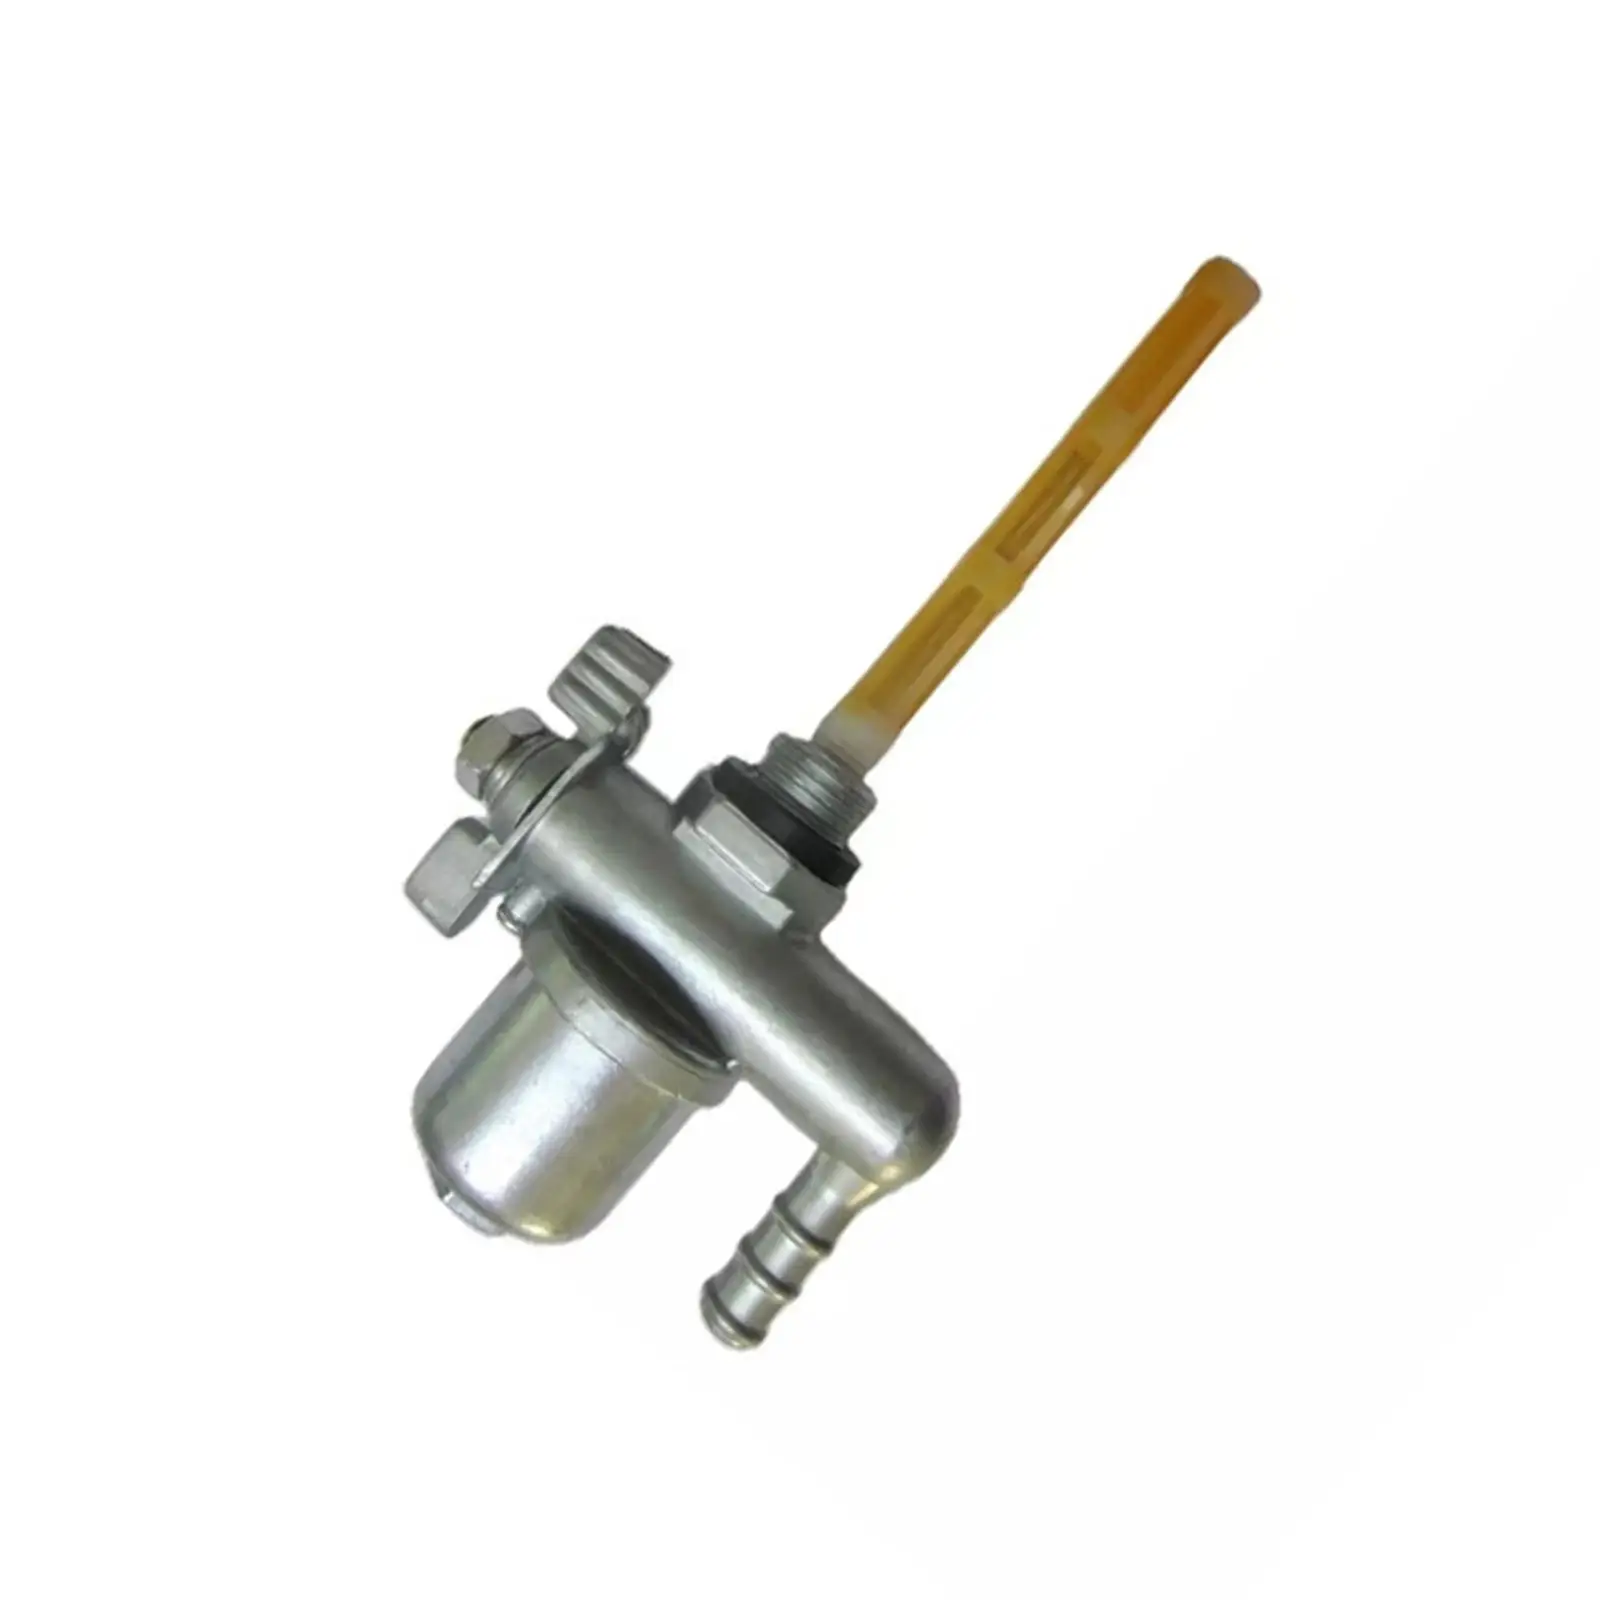 Fuel Gas Tank Switch Valve Petcock Replace for Ruassia msk Motorcycle Parts